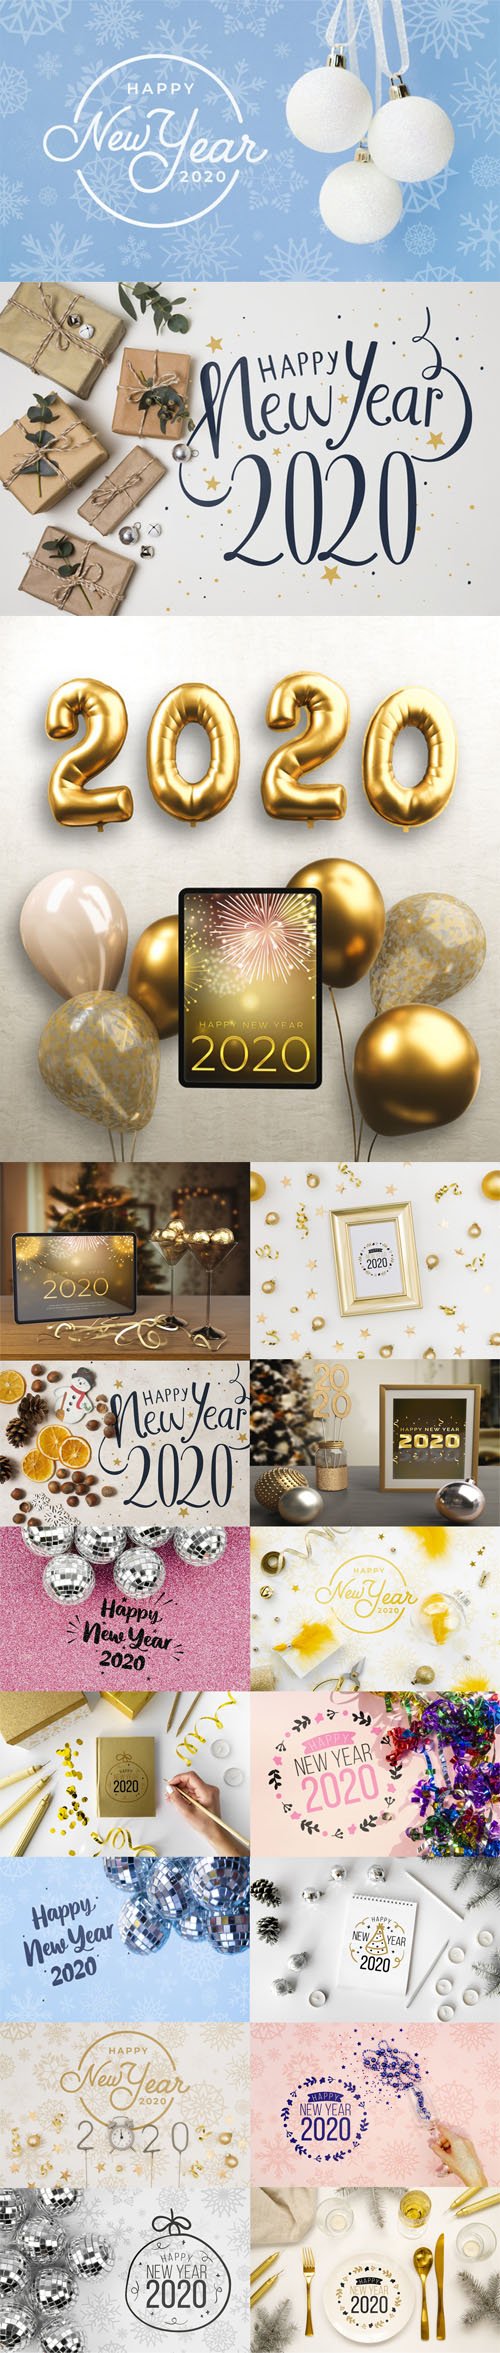 17 Happy New Year 2020 Backgrounds - PSD Mockups Templates